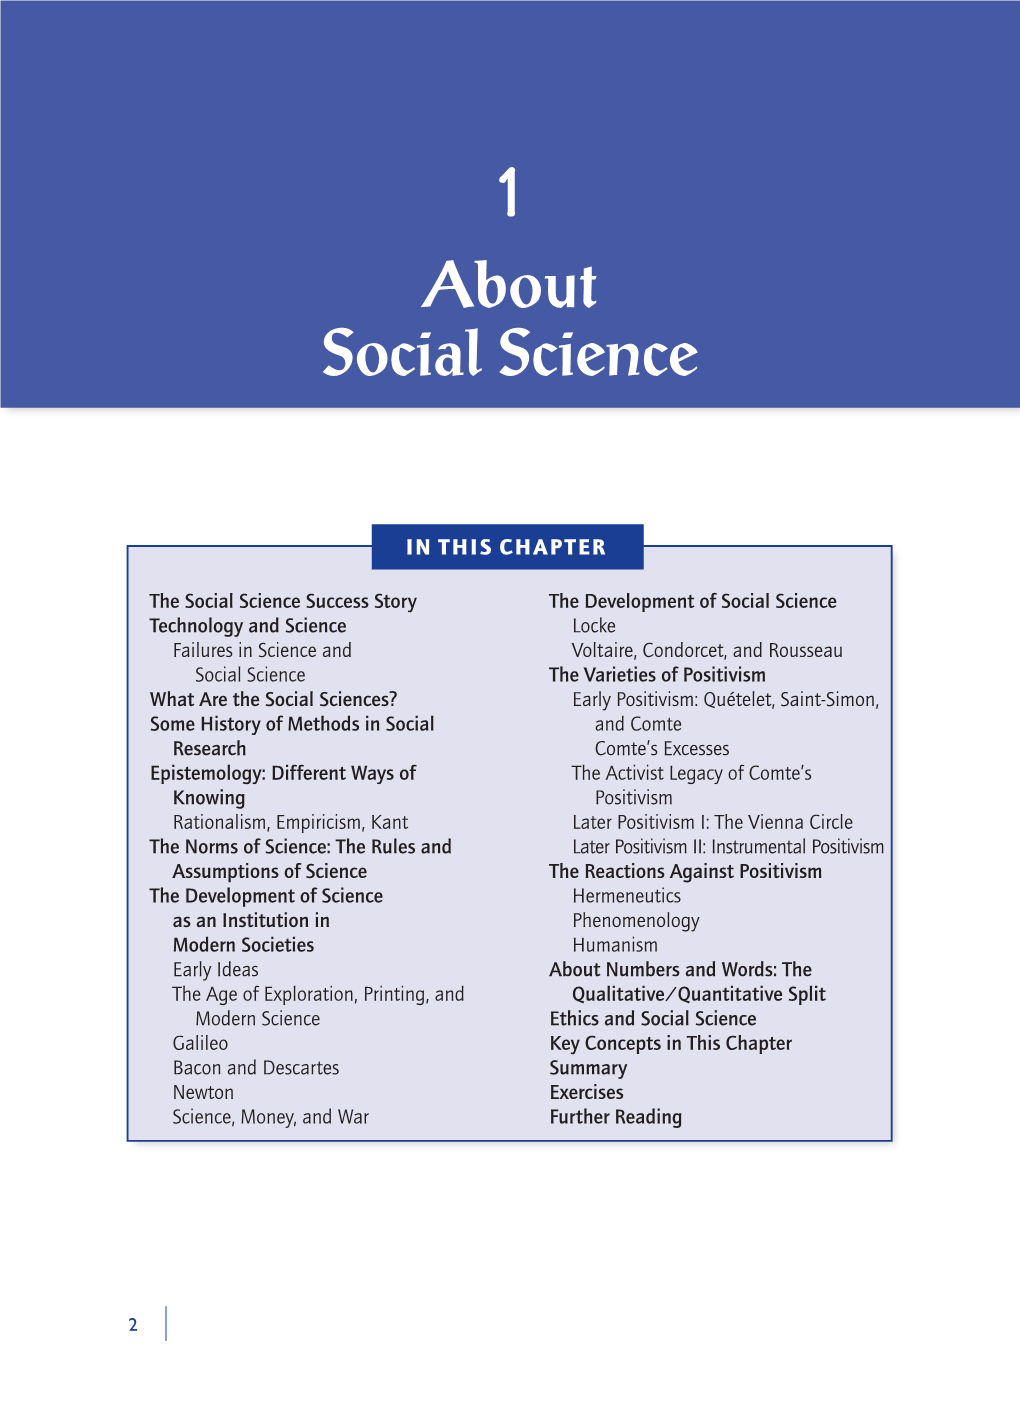 About Social Science